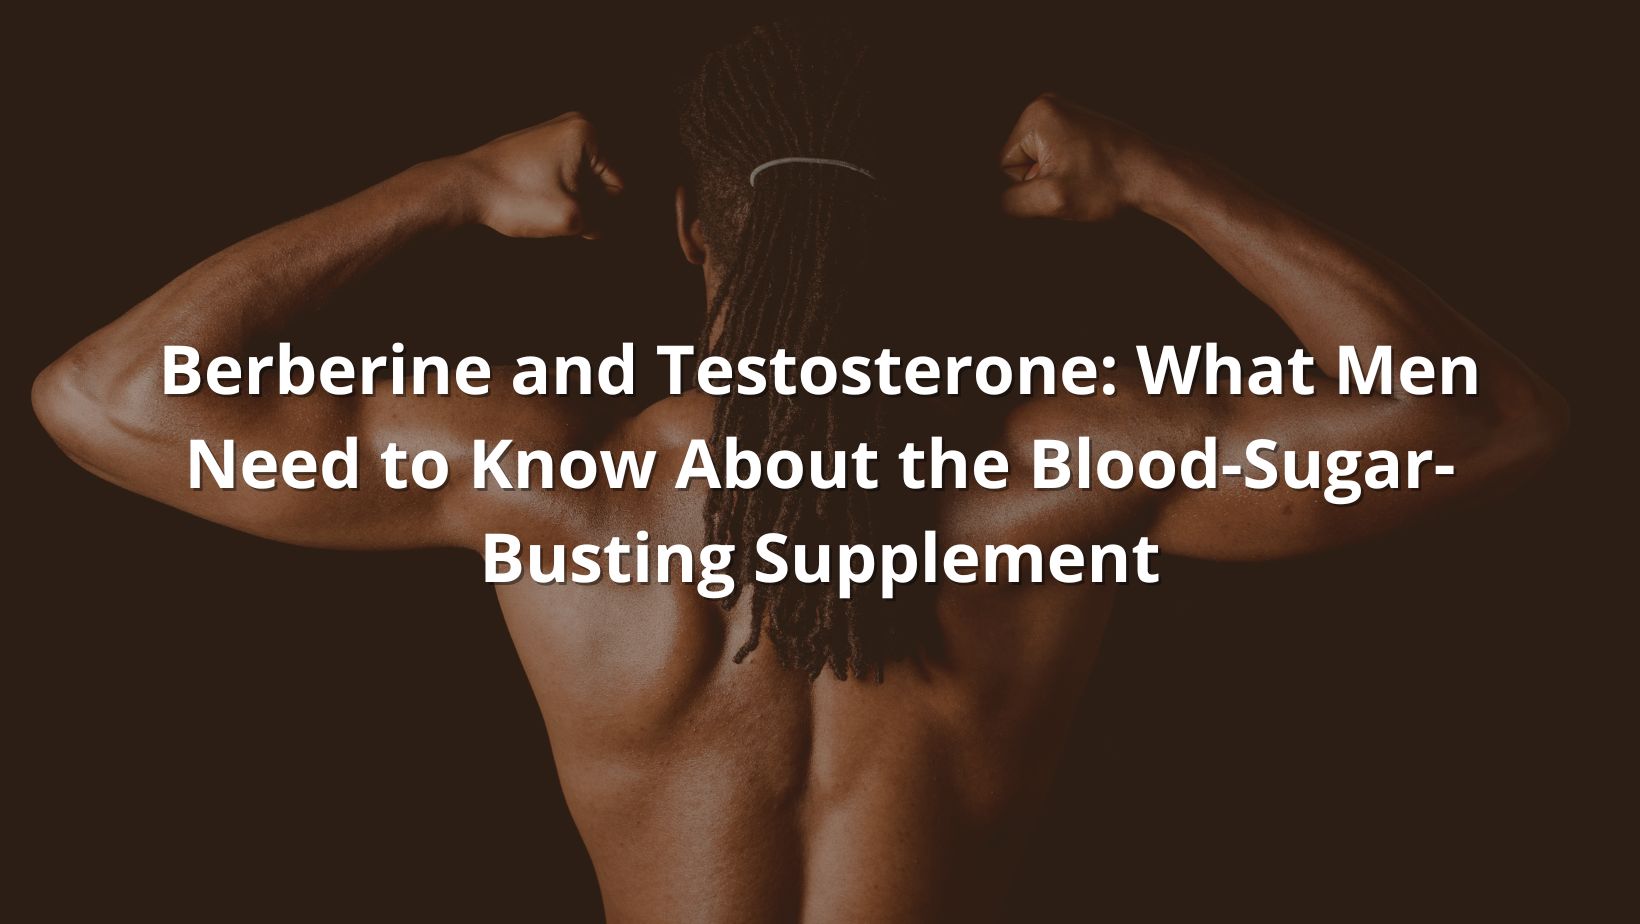 berberine and testosterone featured image